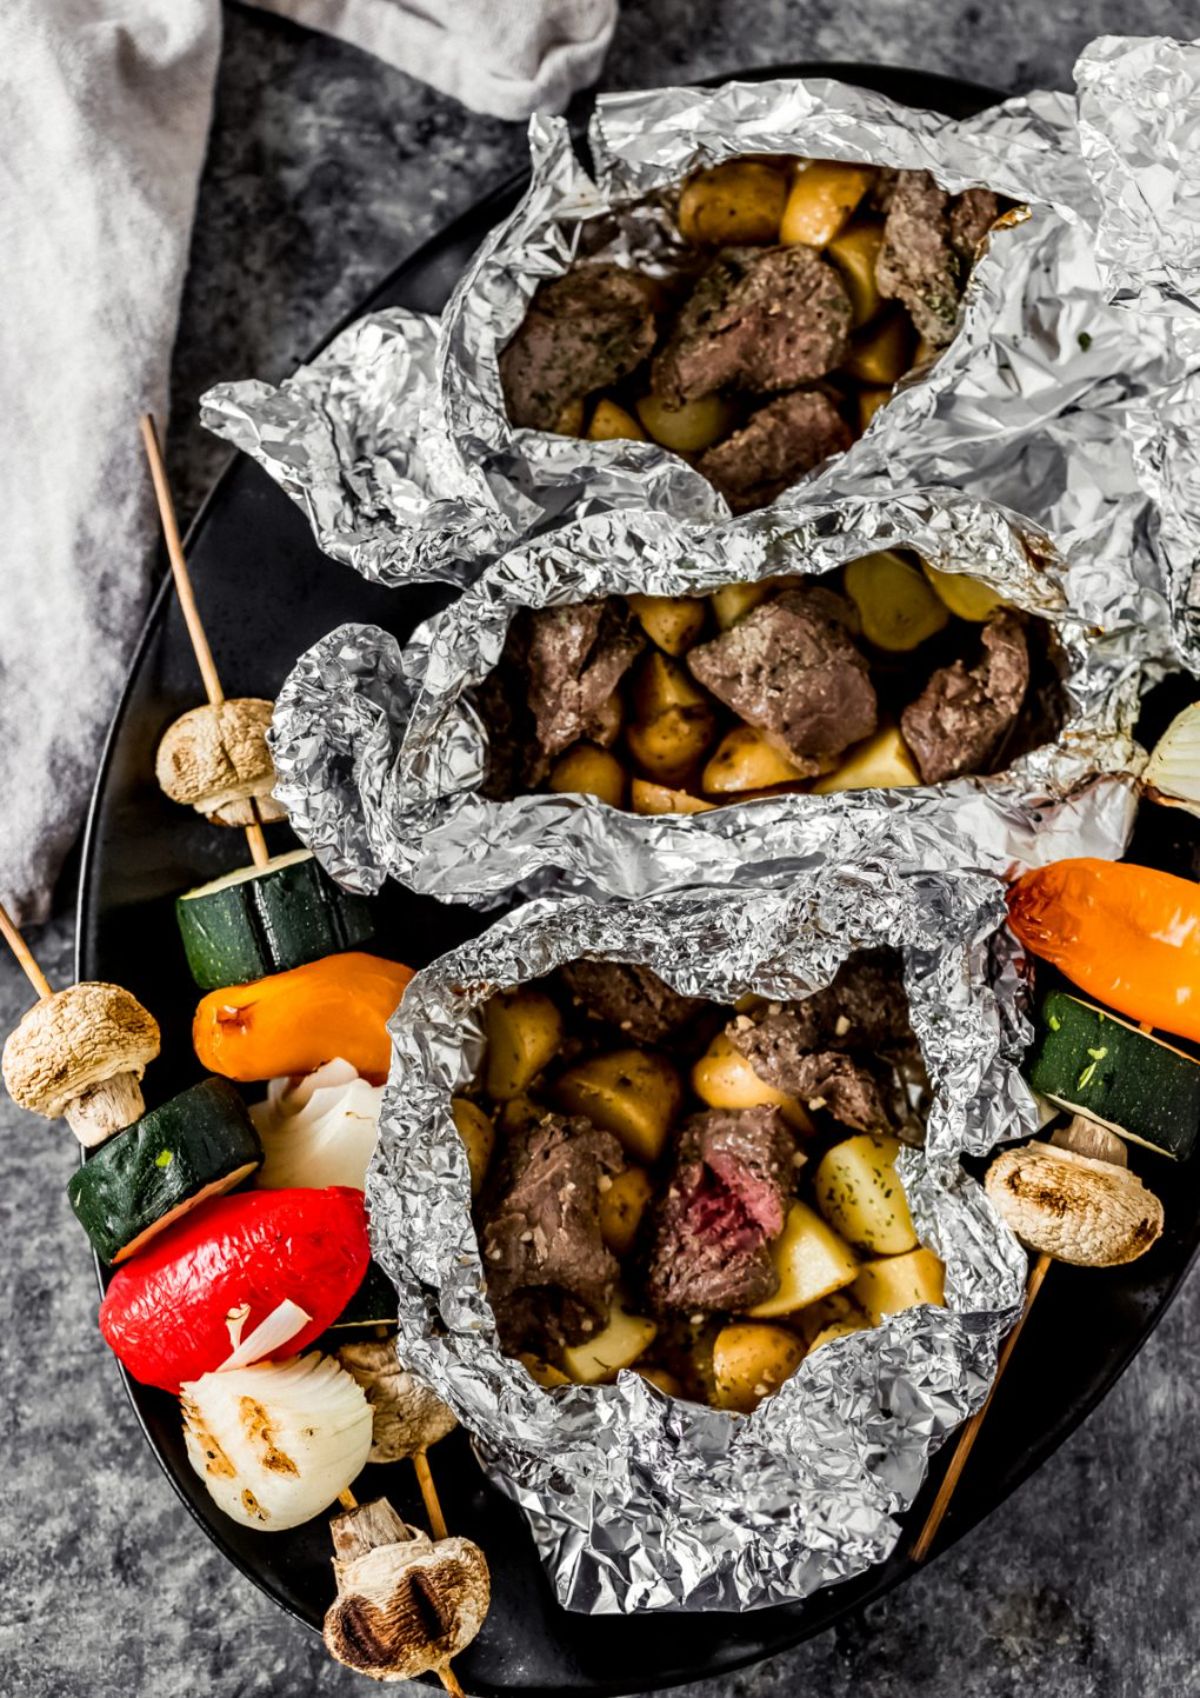 Flavorful elk sirloin steak and potato foil packs on a black tray.